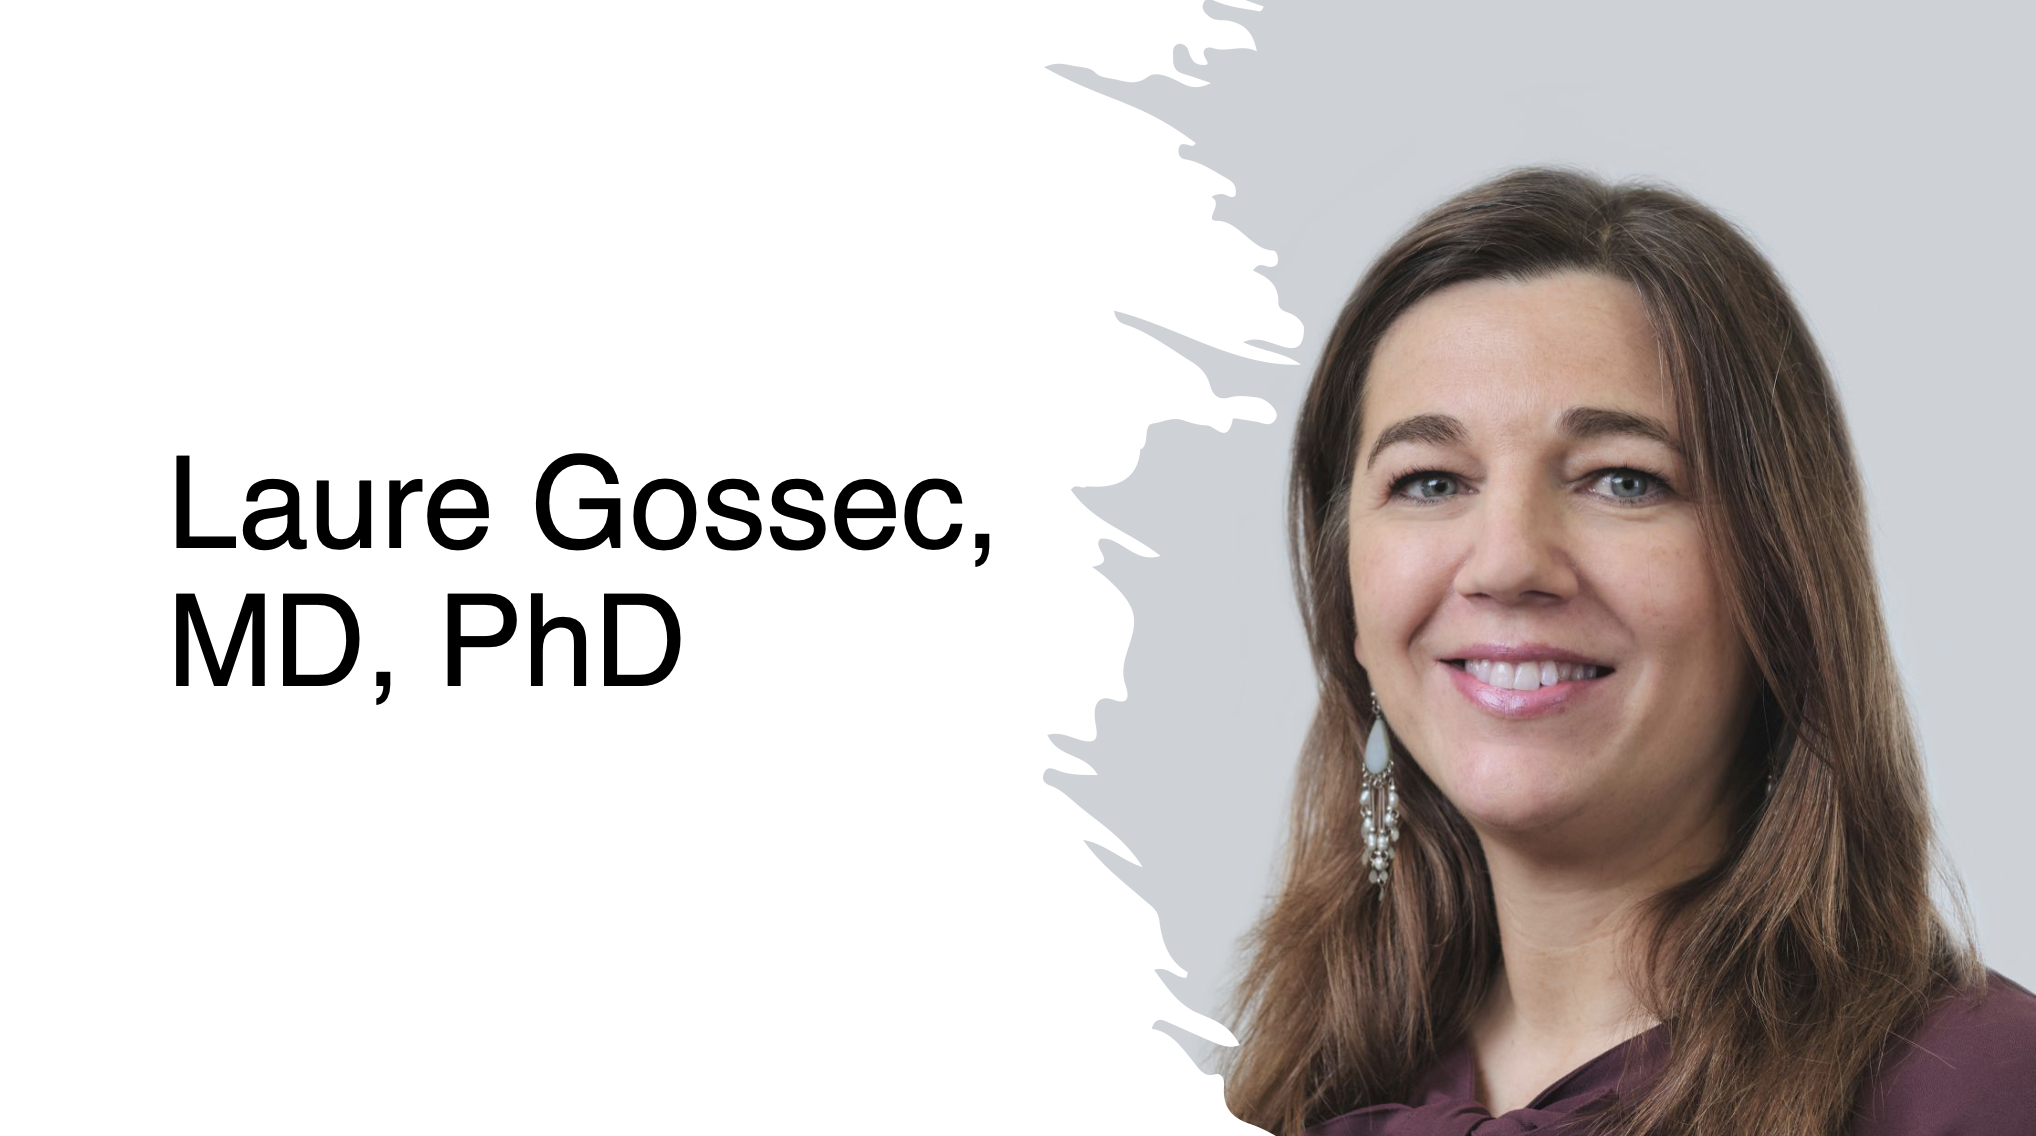 Laure Gossec, MD, PhD: The Link Between Patient-Reported Outcomes and Disease Activity